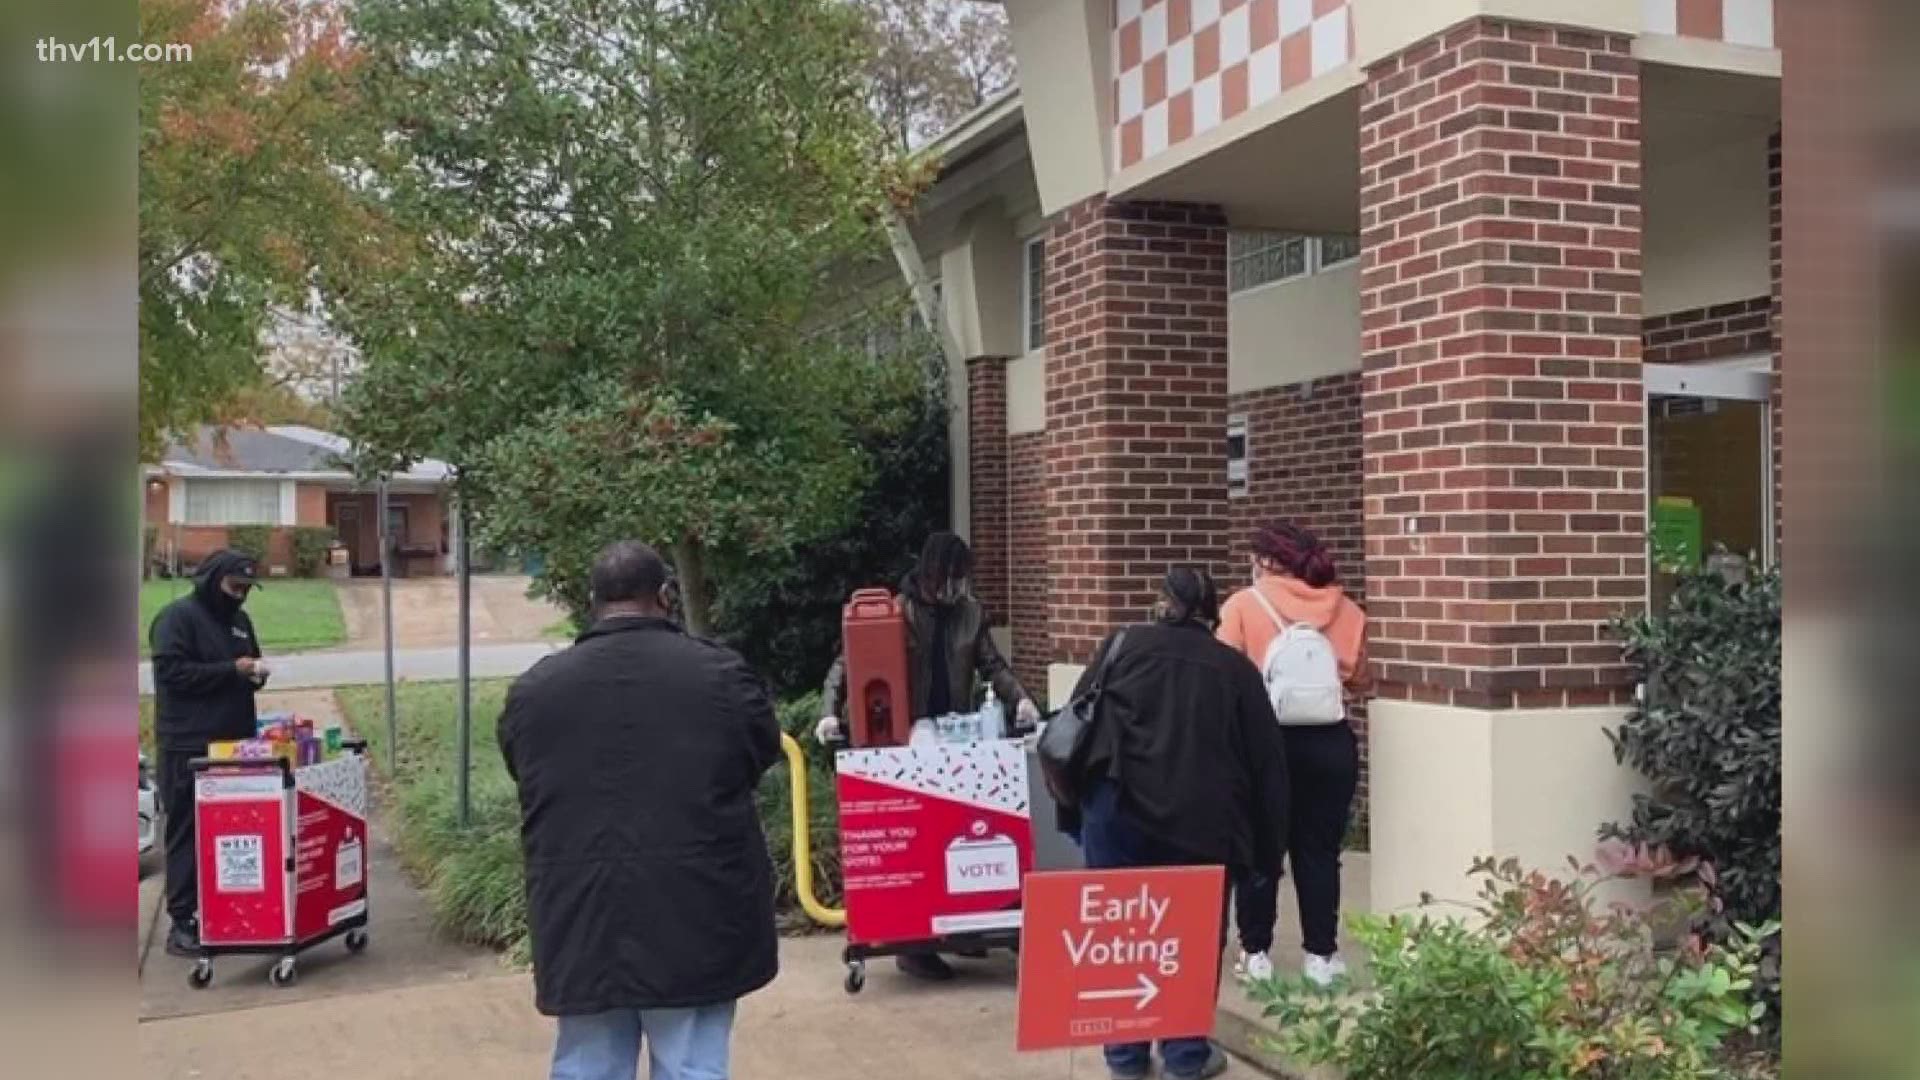 Although we are seeing long lines of voters eager to cast their ballot this election season, organizations have created a task force to get eve more people to vote.